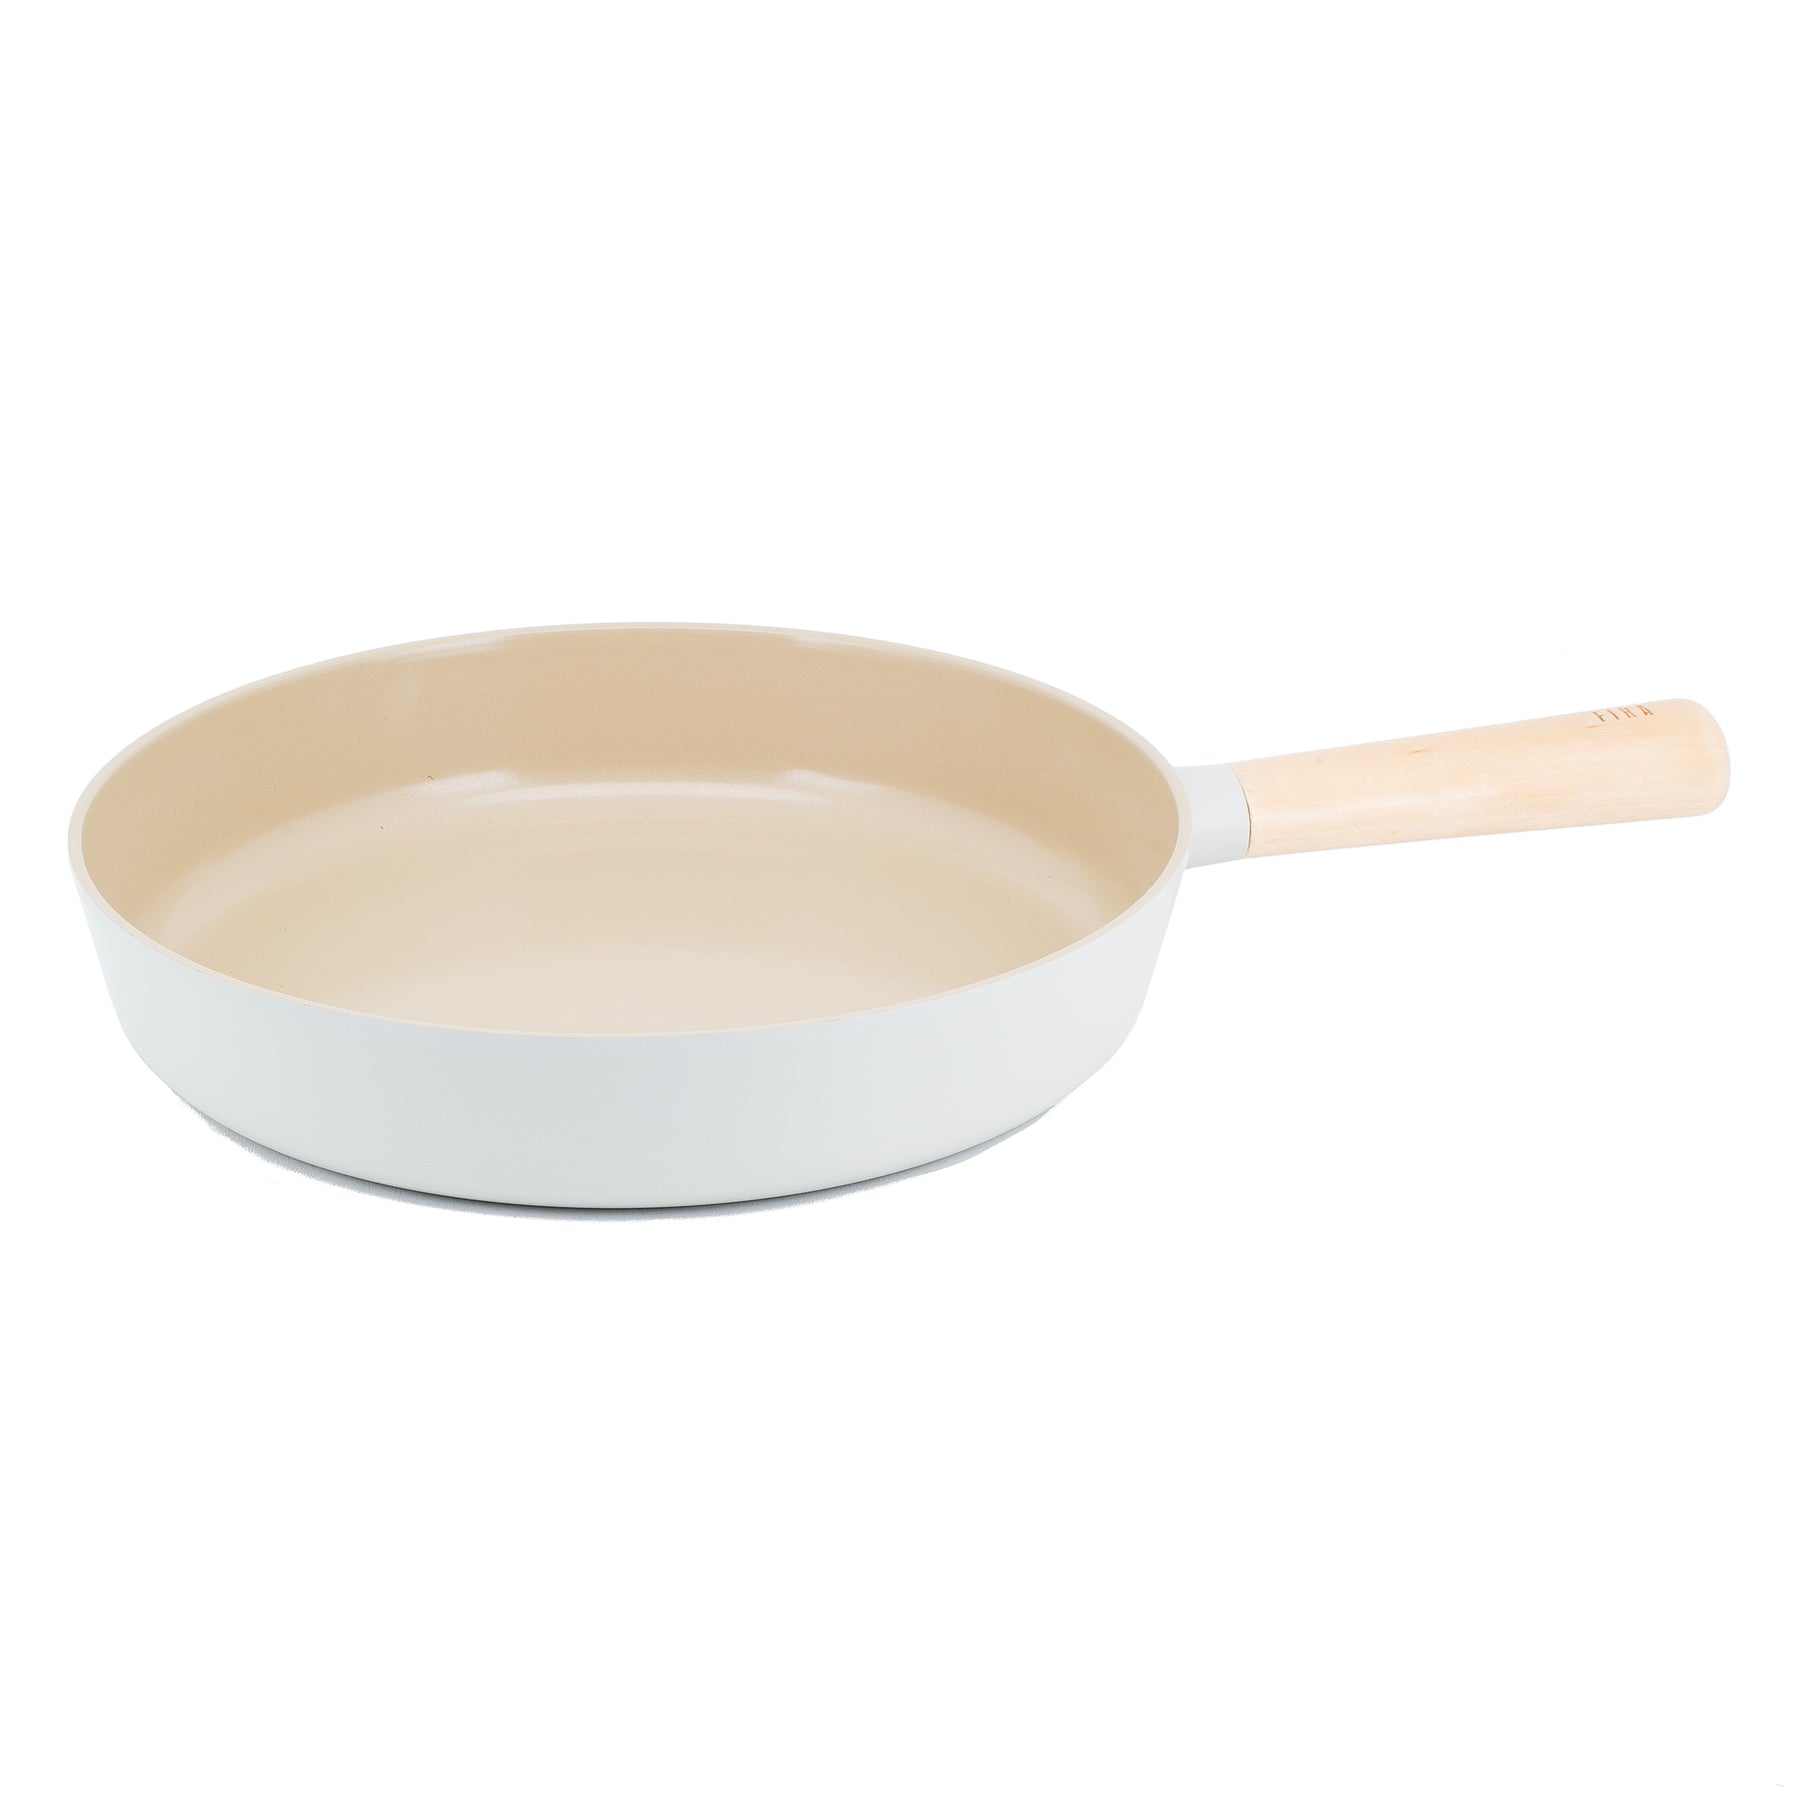 Neoflam Fika 28cm Fry pans and 18cm Sauce pan